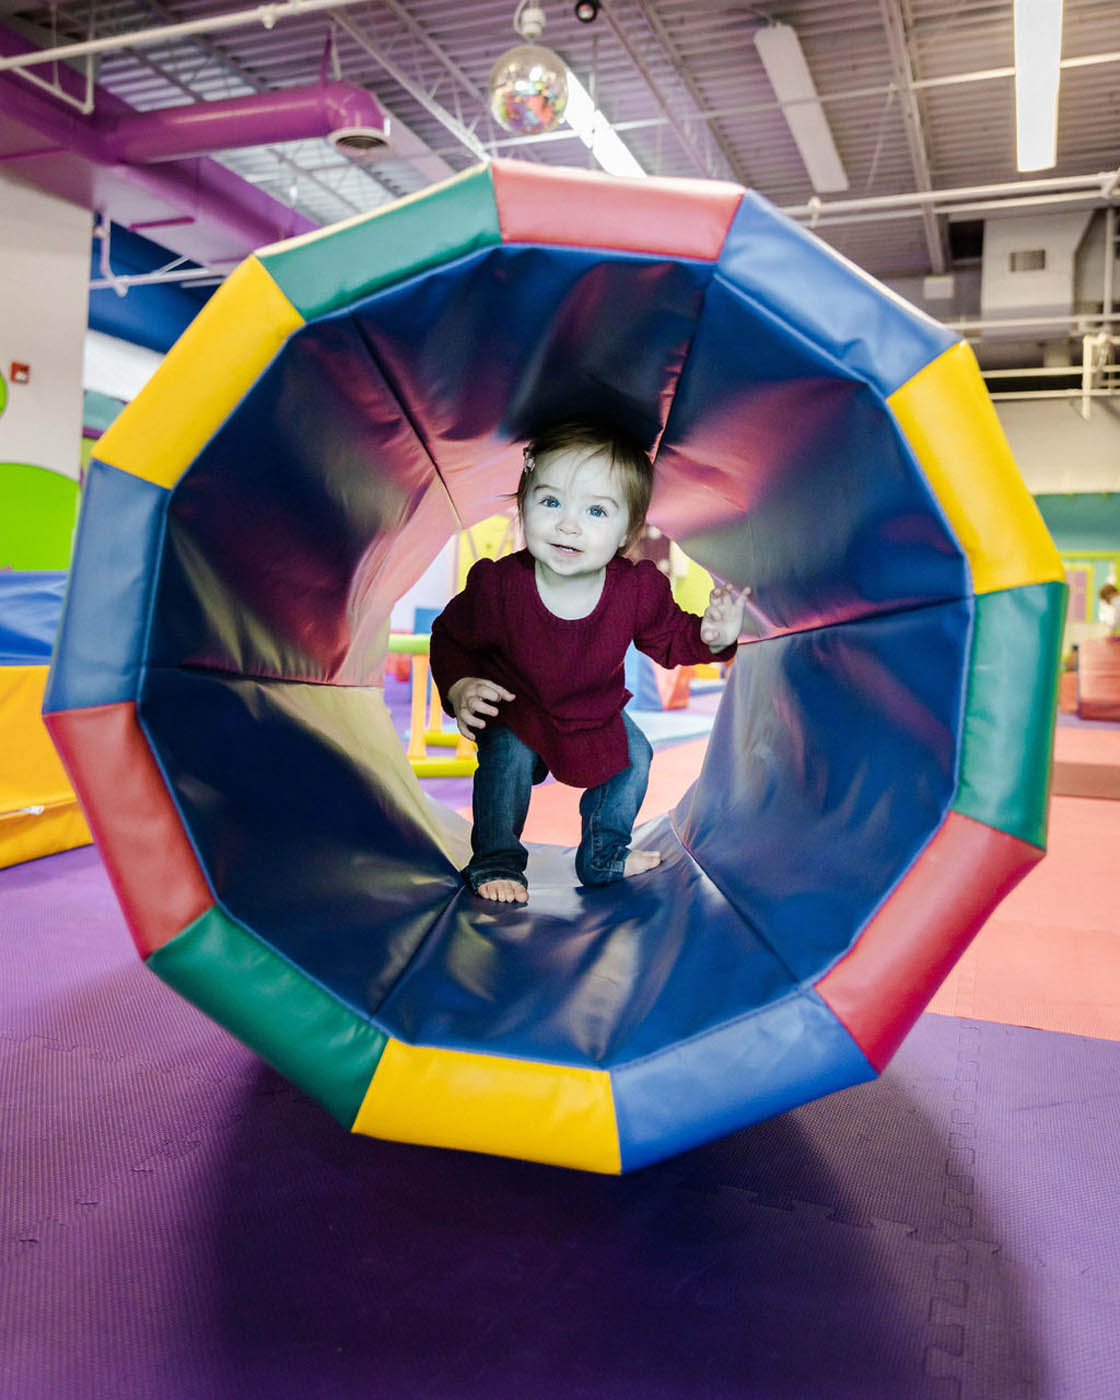 A little girl running through a matt tunnel, contact us for more indoor kids activities in Charlotte, NC.